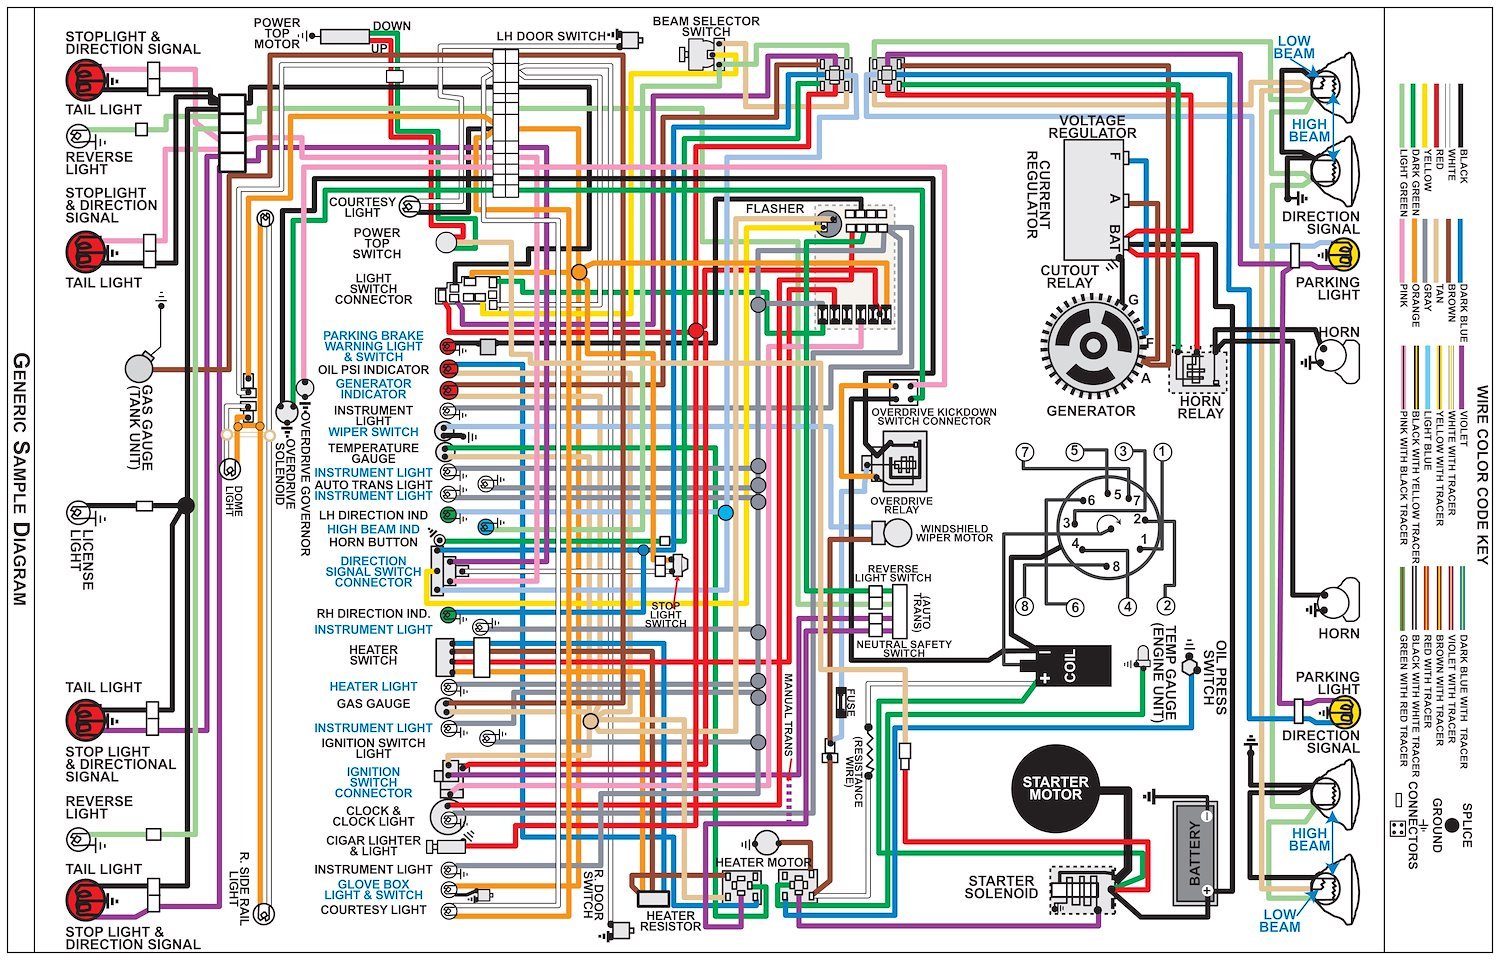 Wiring Diagram for 1969 Dodge Coronet Super Bee